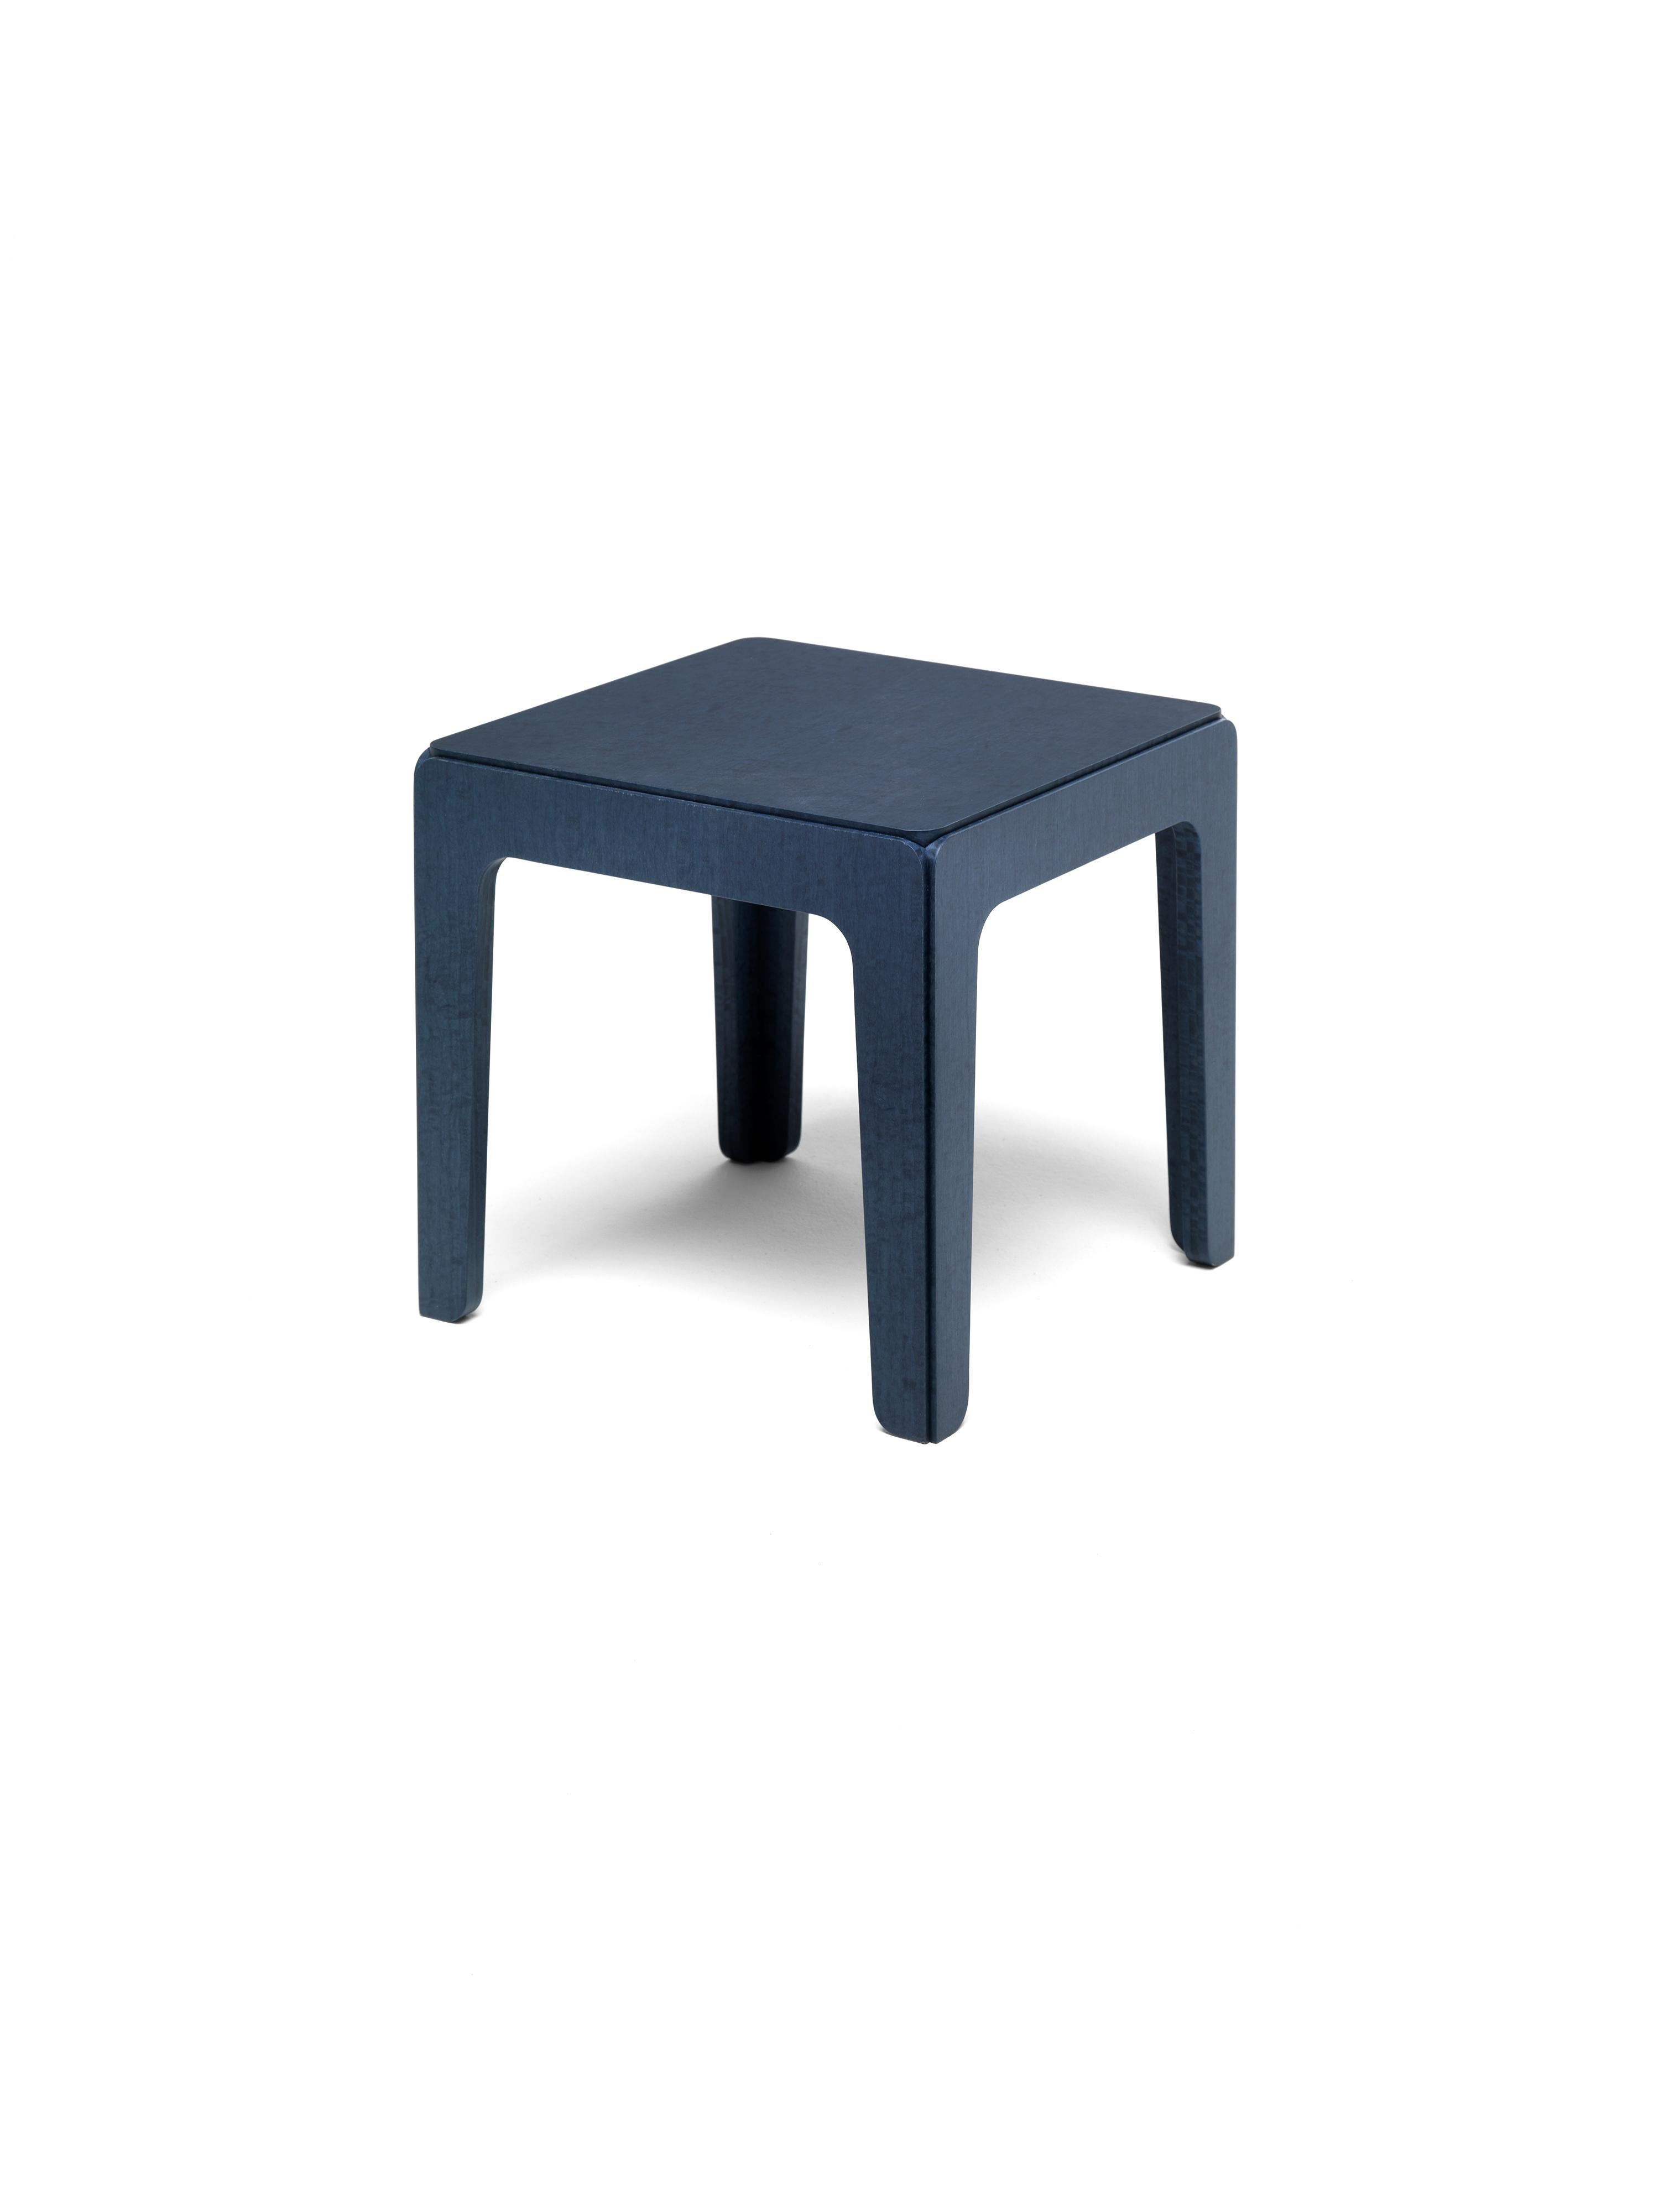 Contemporary 21st Century Modern Wooden Side Tables Veneered In Blue Eucalyptus For Sale